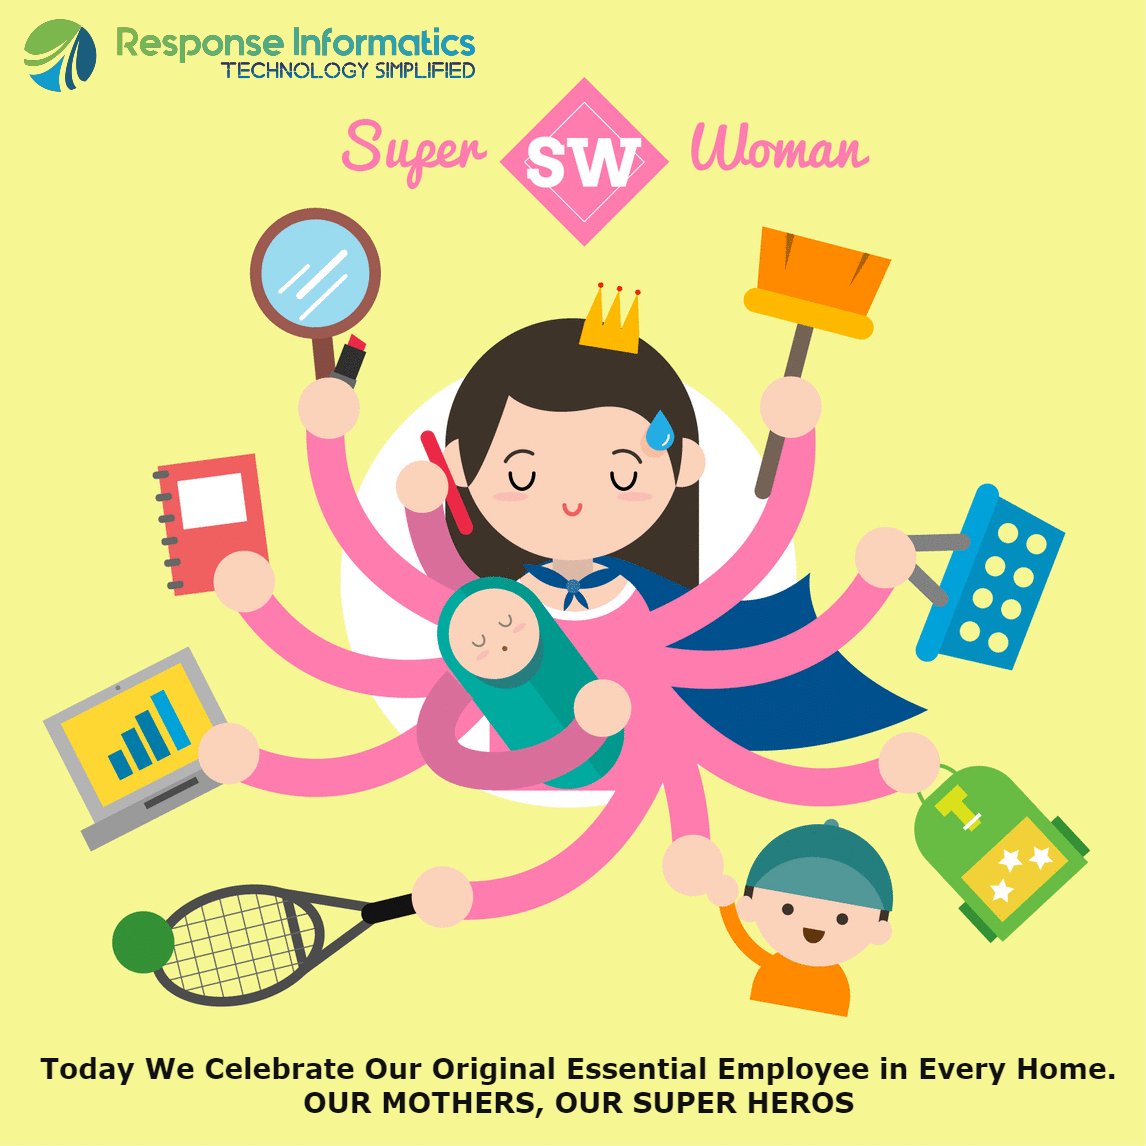 This Mother’s Day, Response Informatics celebrates Mothers - the original #EssentialEmployee at every home.
Thank you for being our on-call counselor, doctor, tutor, and more. Most importantly, thank you for being the spectacular you.

Happy Mother’s Day!

#MothersDay2022